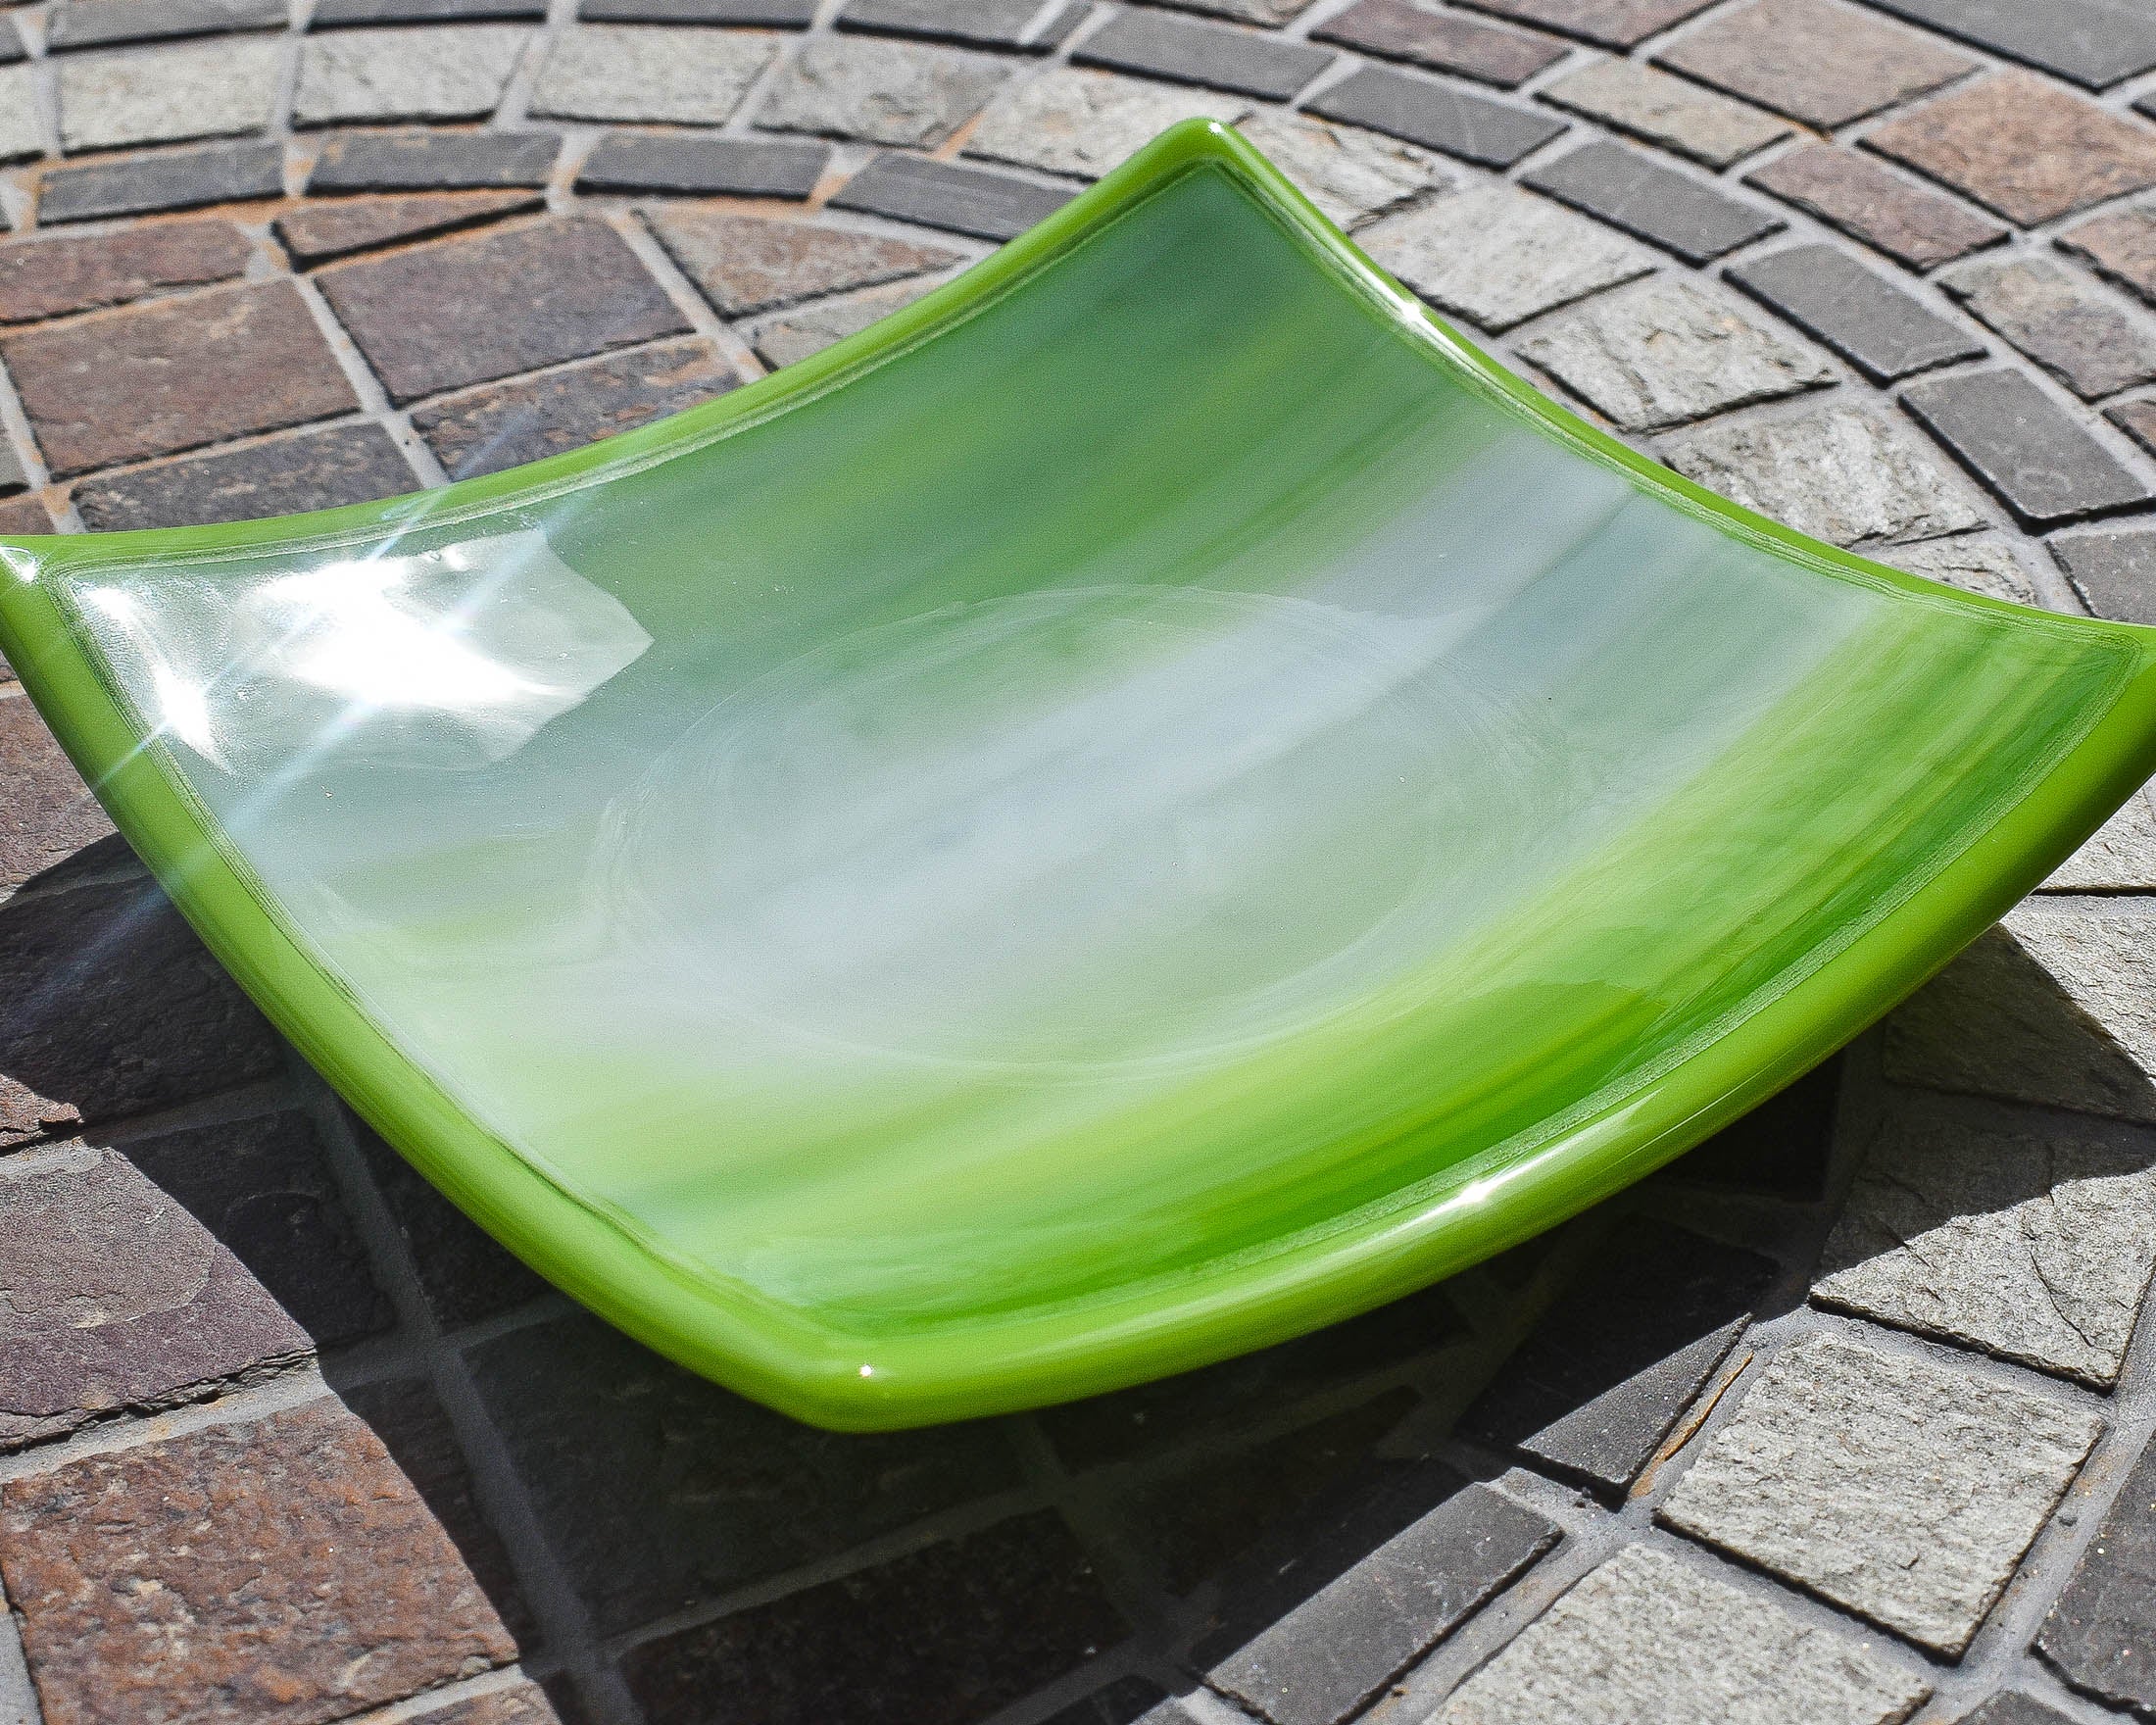 Small, square glass dish in lime green and white on stone table